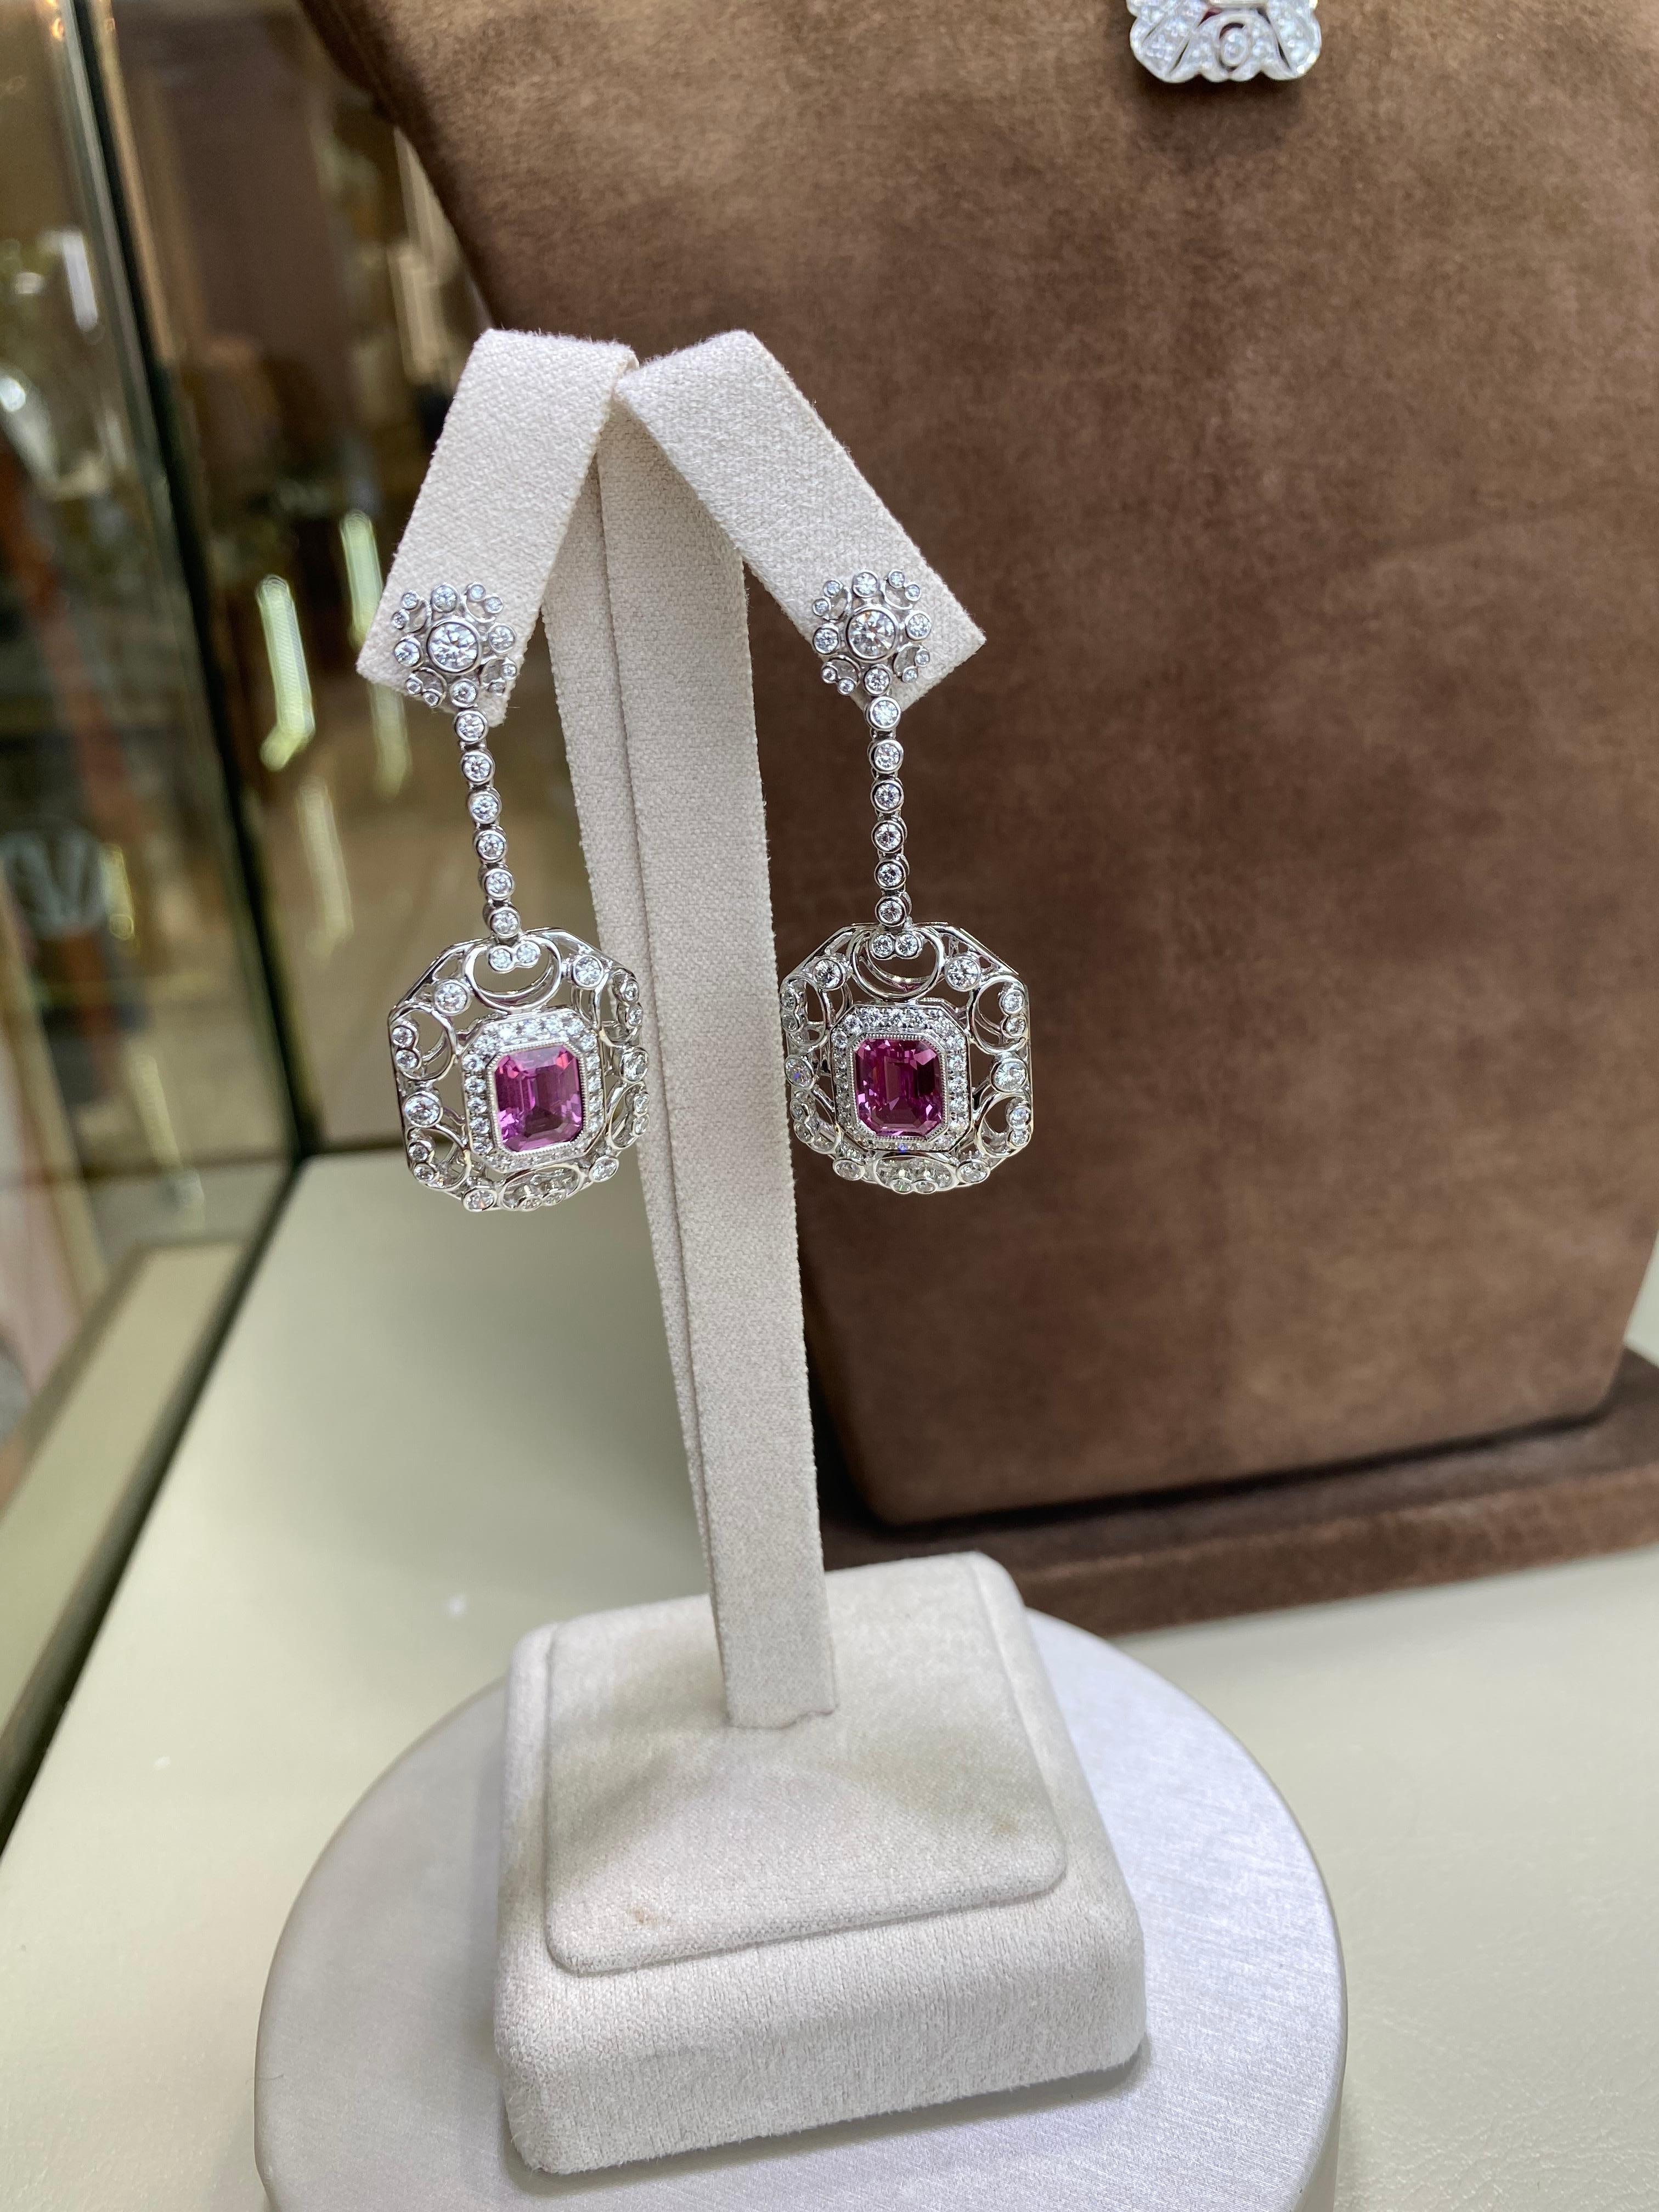 Beautiful 4.15cttw Square-Shaped Rubys surrounded by 1.92cttw Diamond on 18kt White Gold Hooks. With a classic and timeless vintage-inspired design, these earrings will make you feel like you're a royal in the Renaissance Age. Only one pair